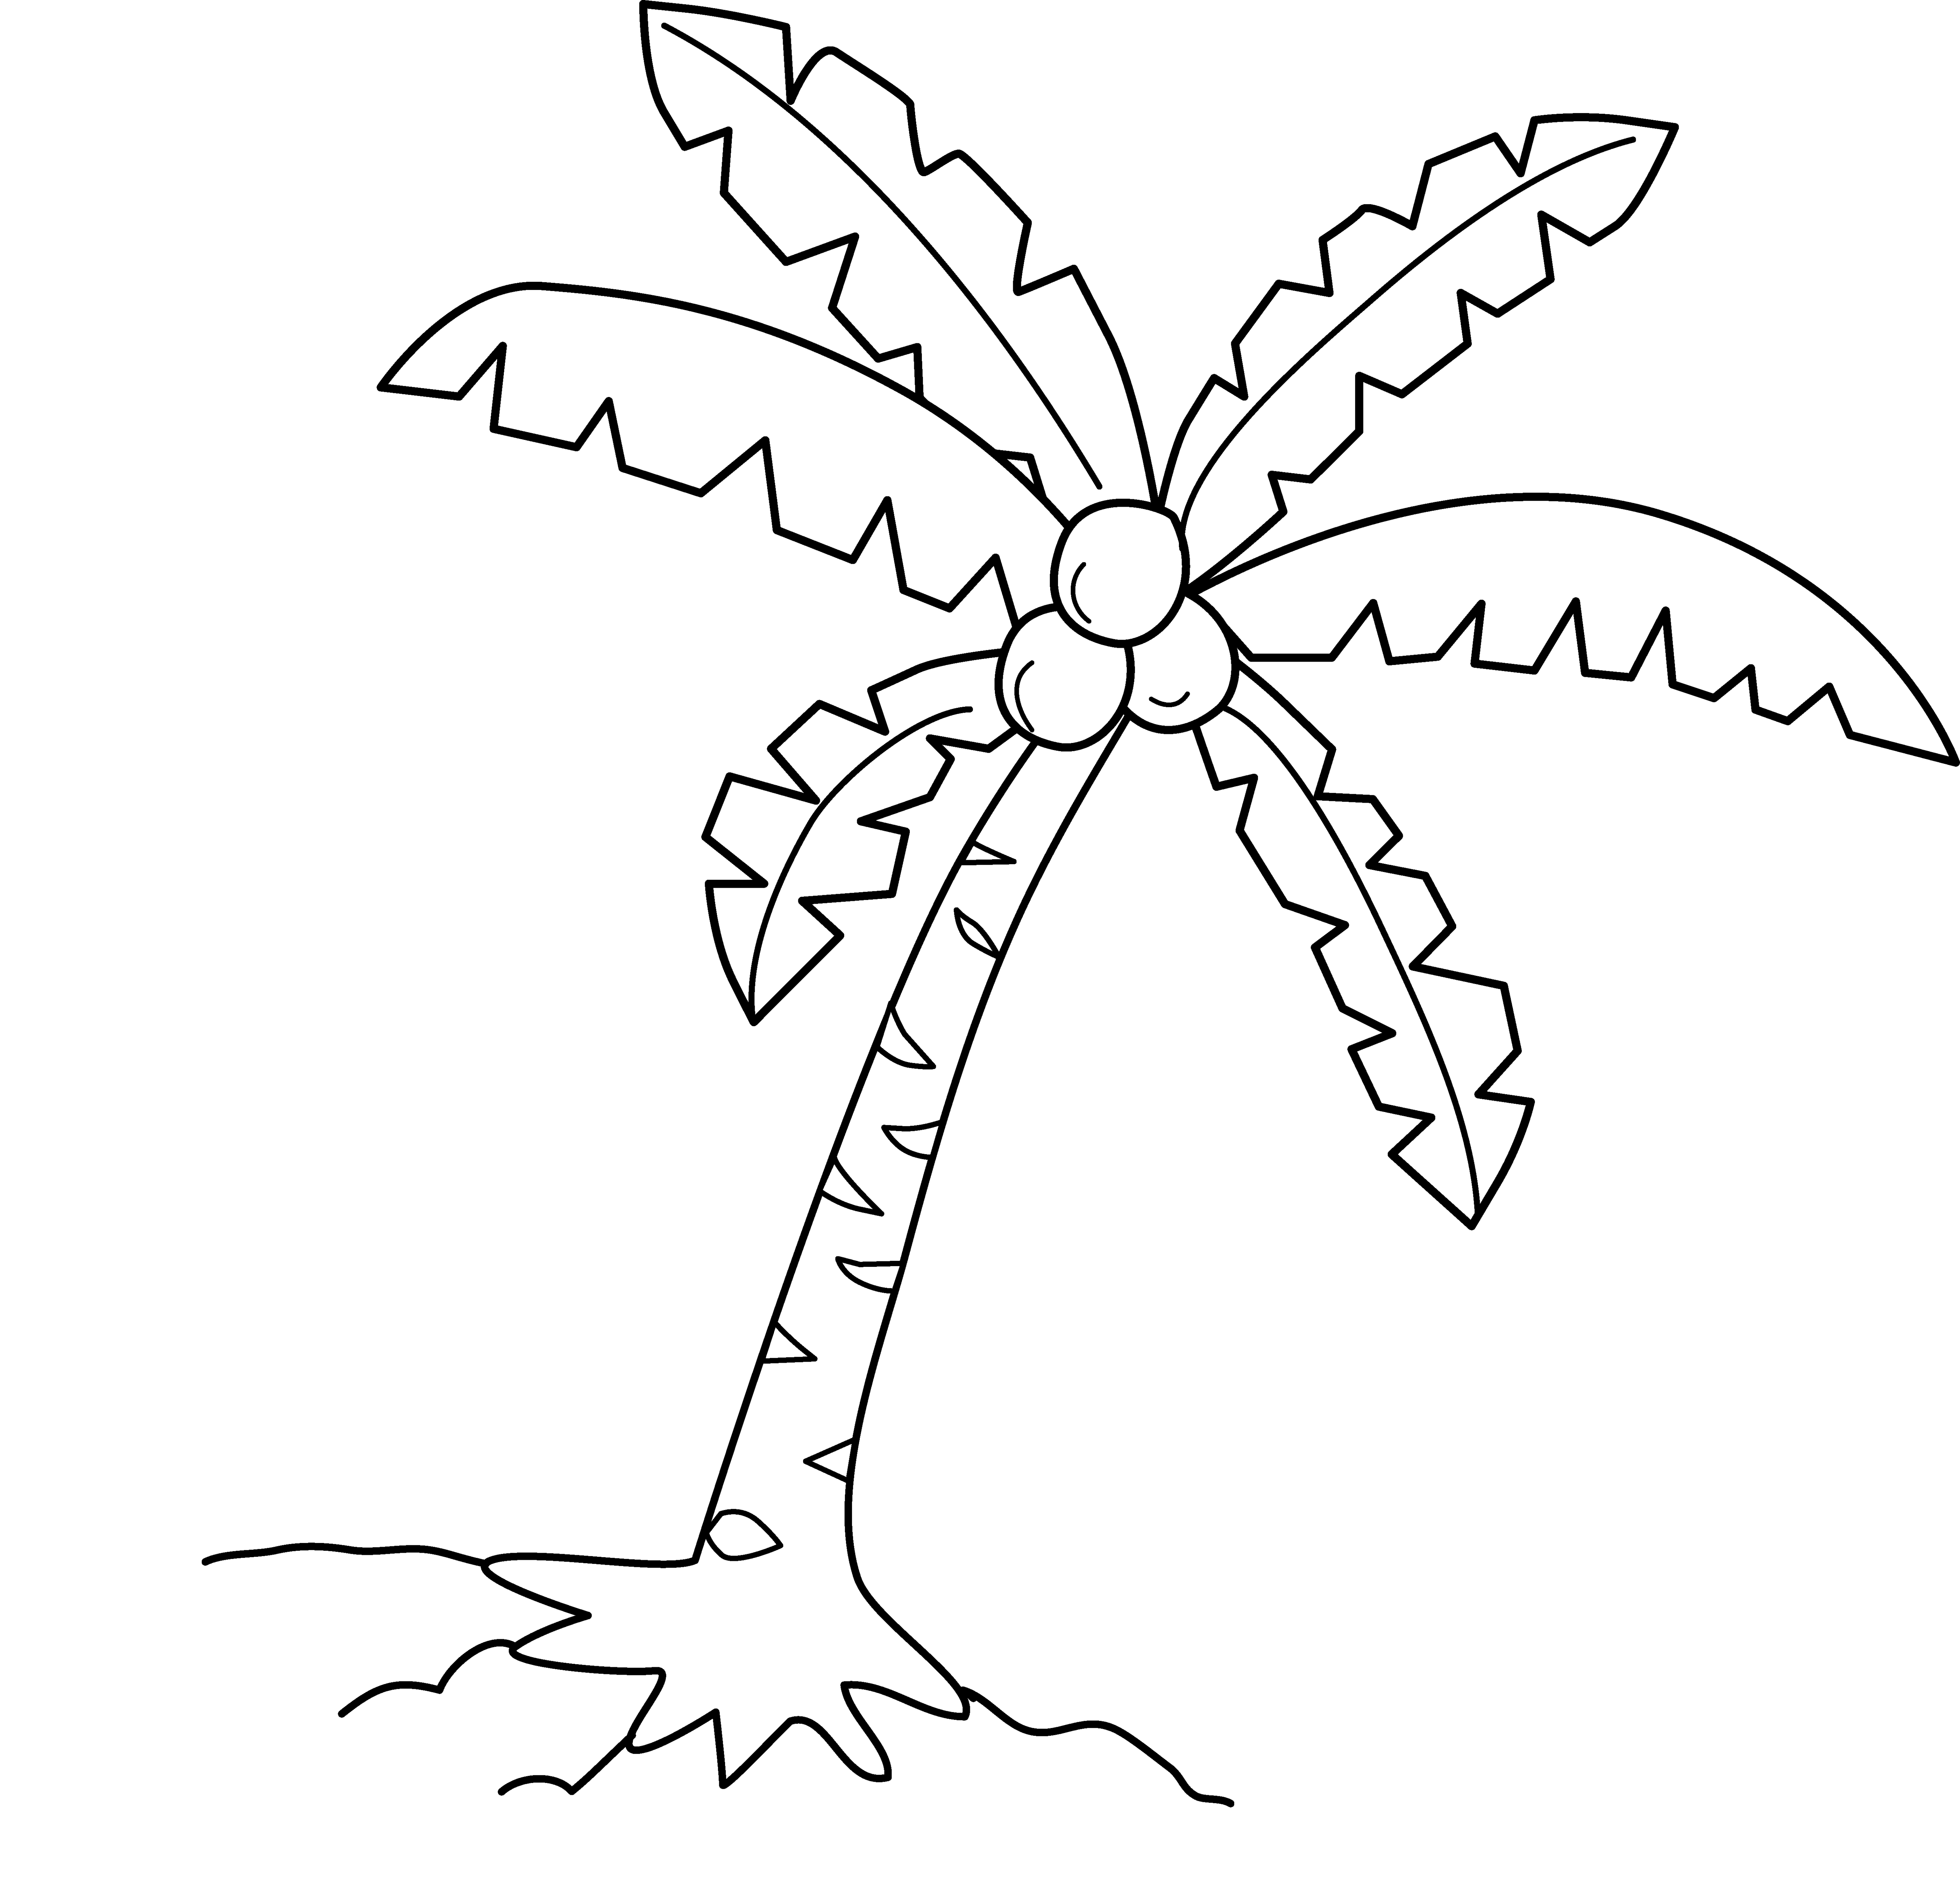 How to draw coconut tree step by step - YouTube